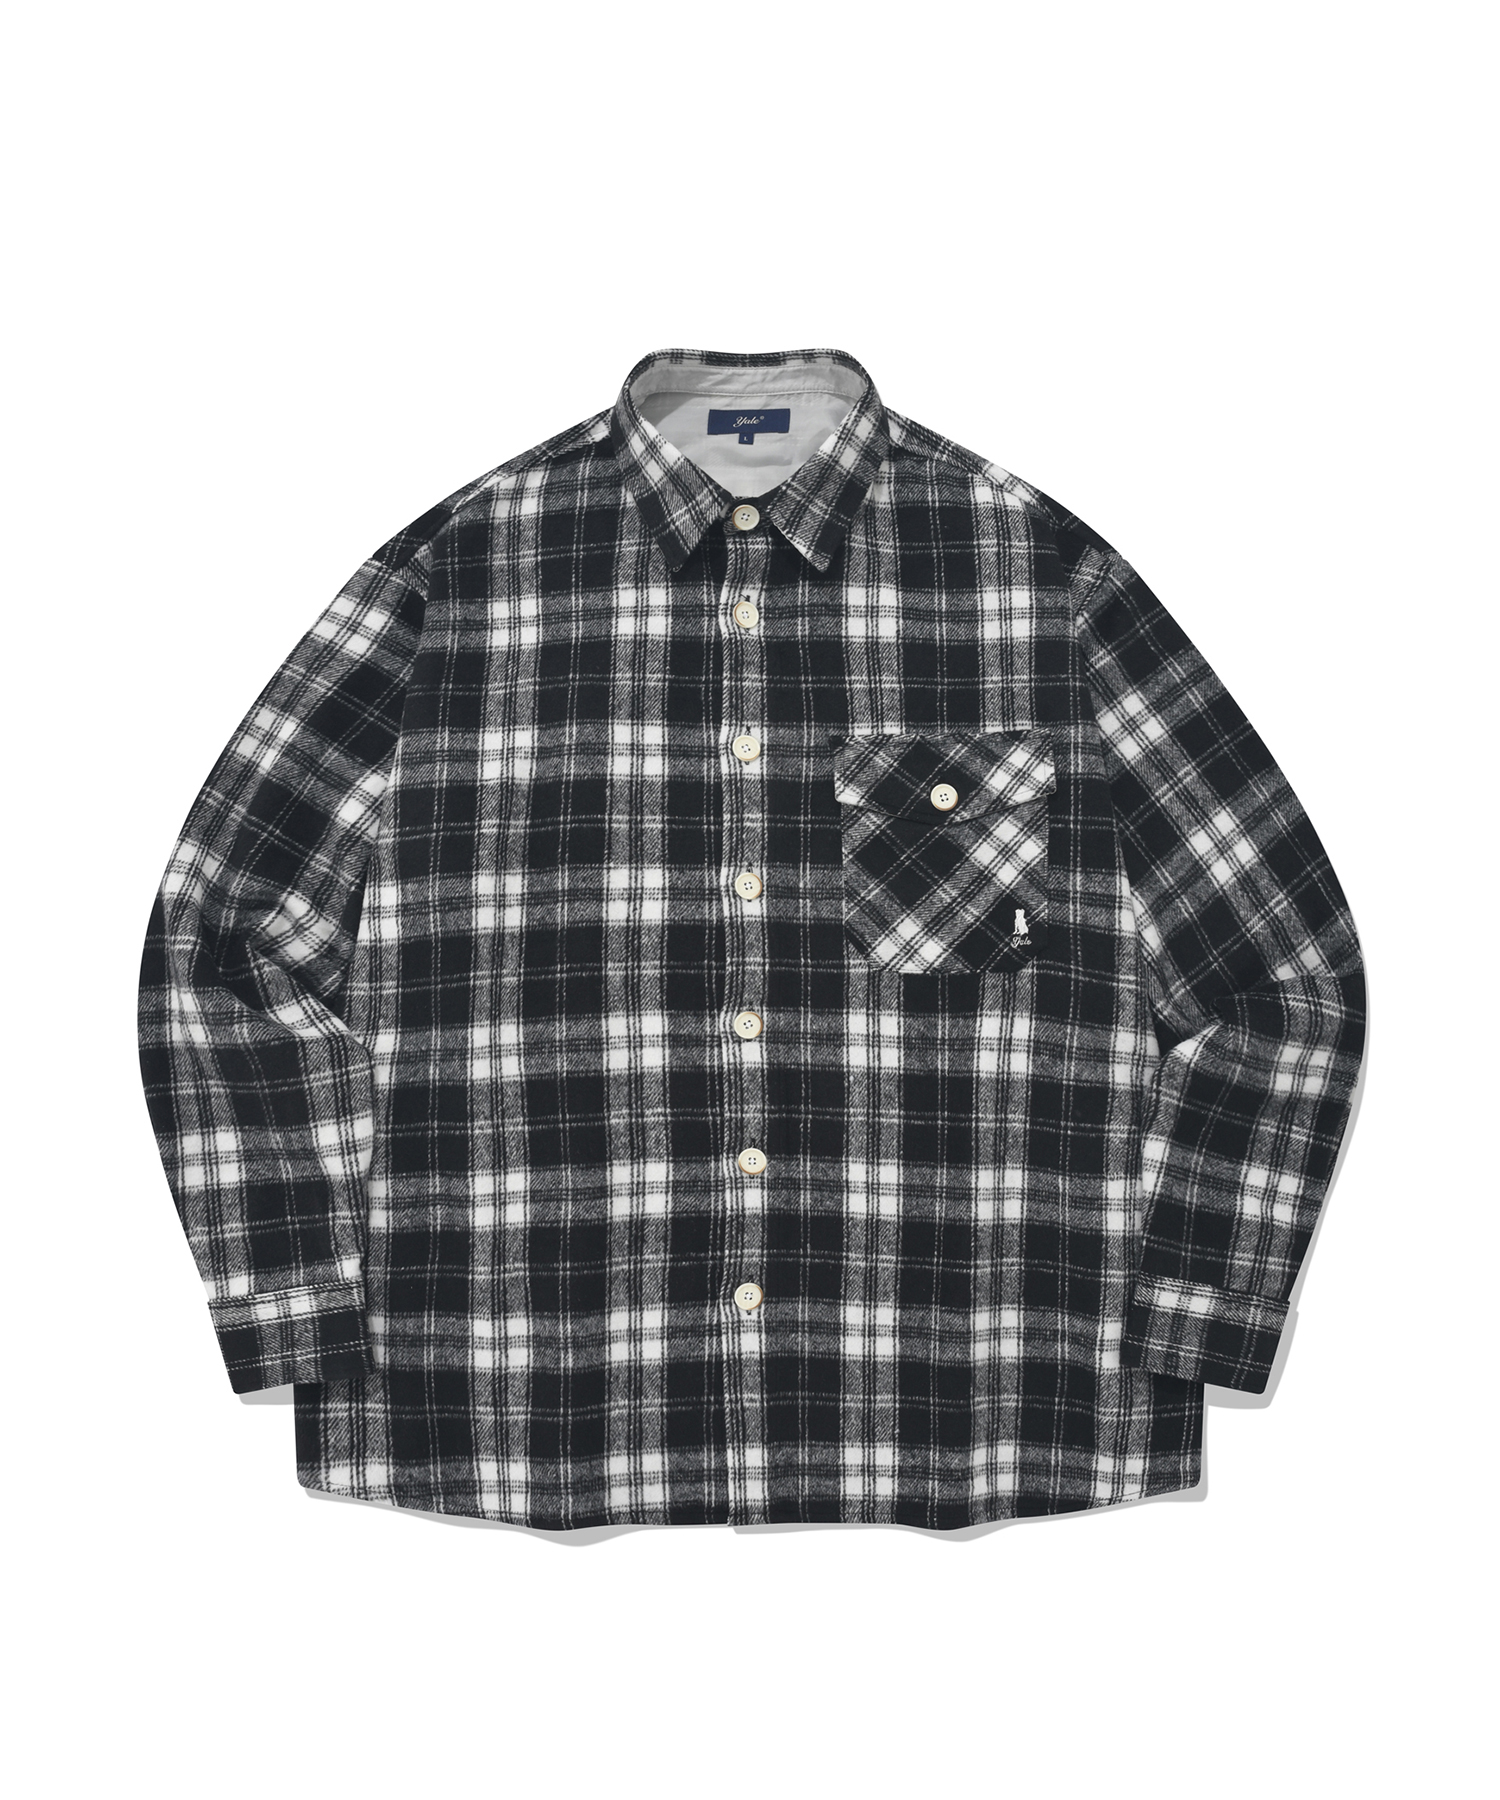 HEAVY FLANNEL ONE POCKET CHECK SHIRT IVORY